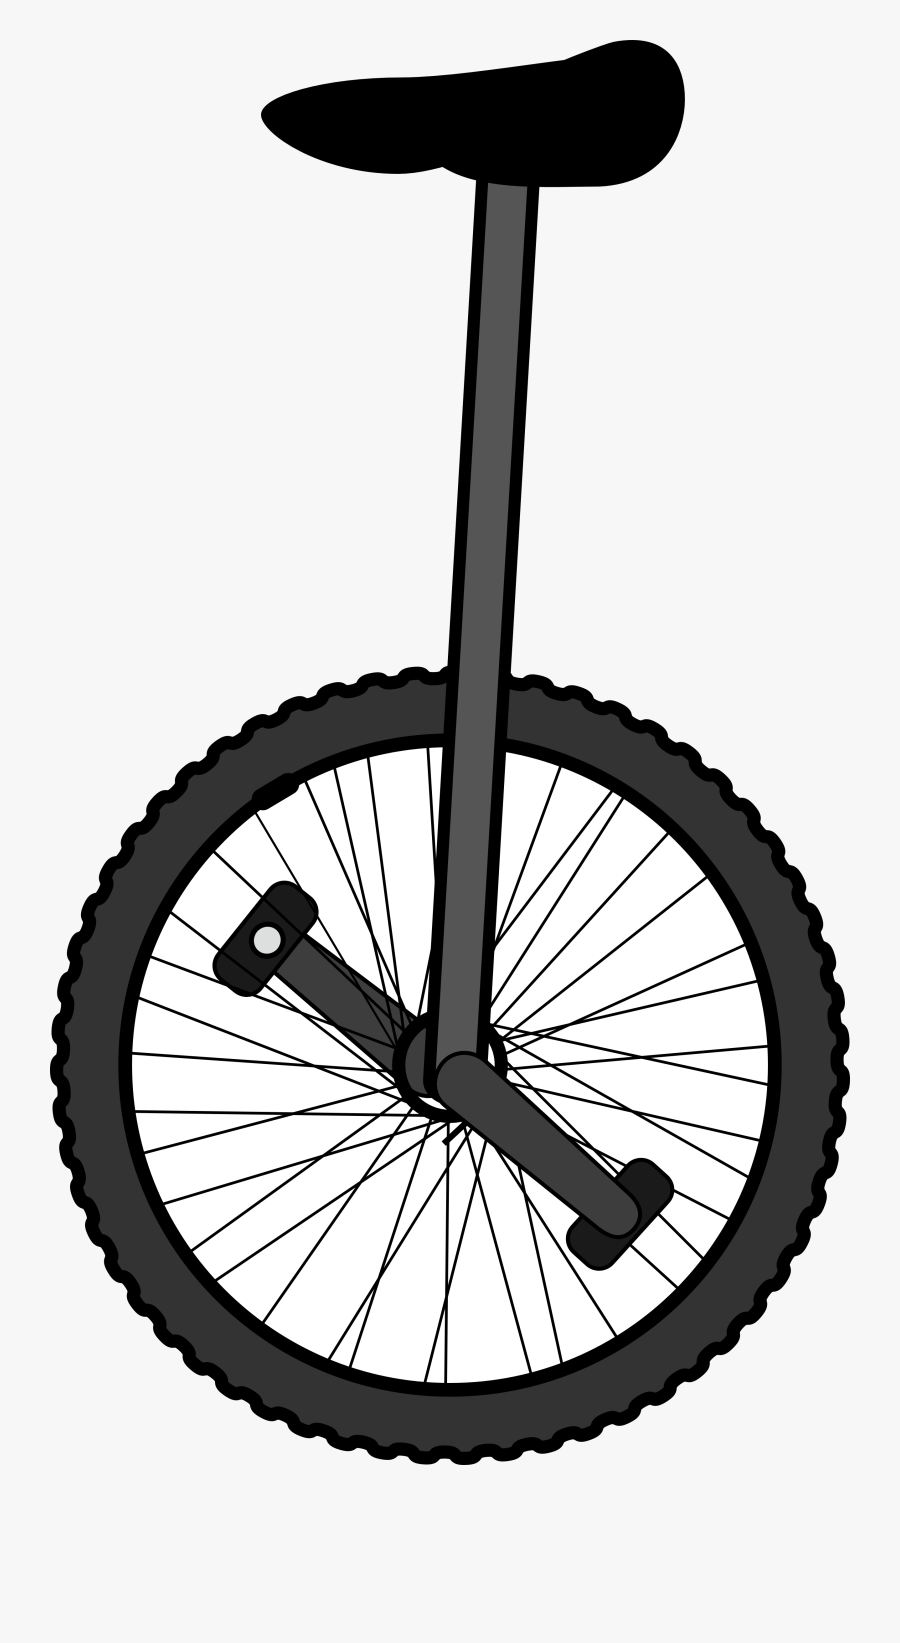 Unicycle - Unicycle Clipart Black And White, Transparent Clipart